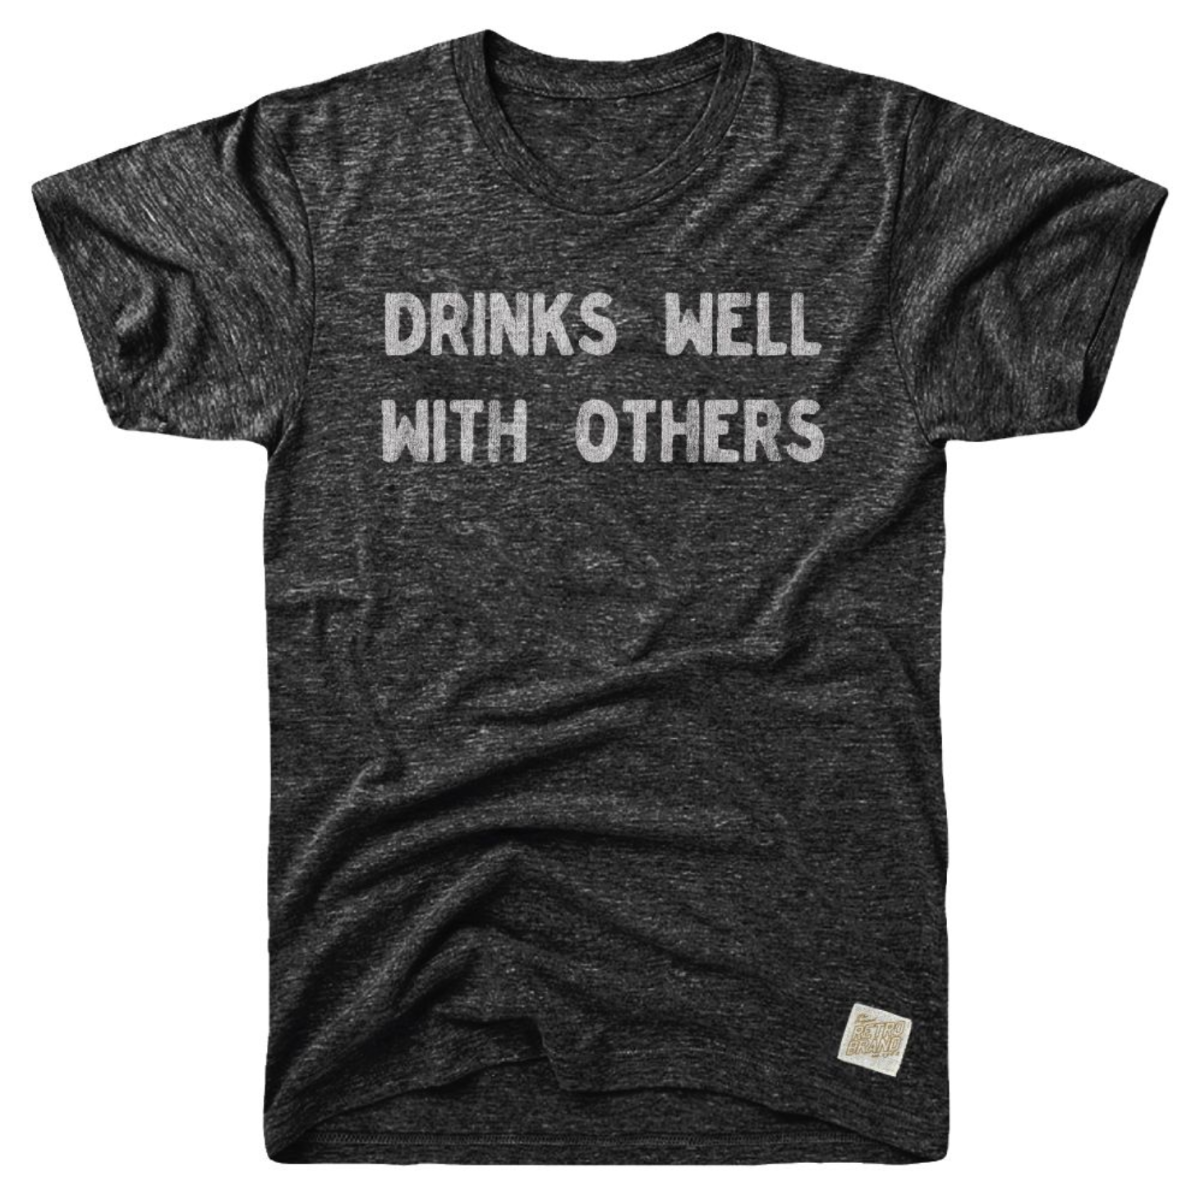 Drinks Well With others in white font on streaky black tri-blend tee shirt